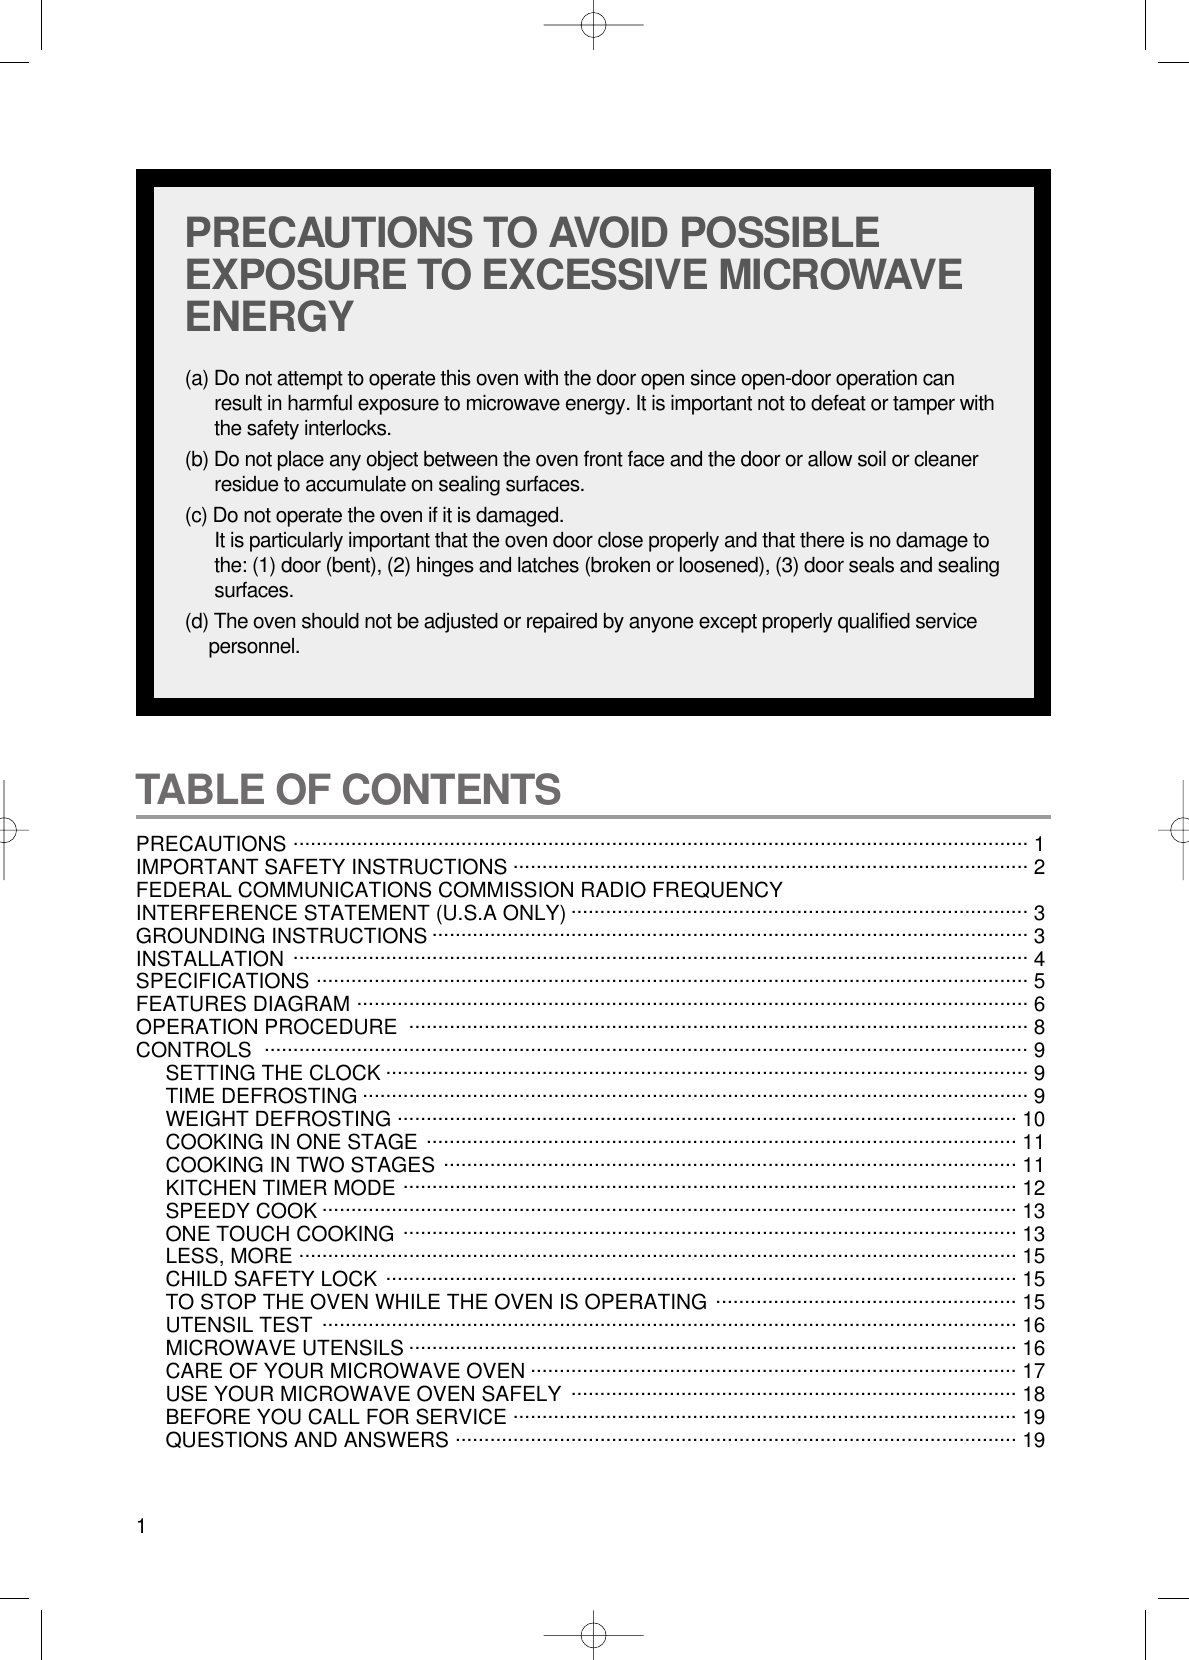 1TABLE OF CONTENTS PRECAUTIONS ............................................................................................................................... 1 IMPORTANT SAFETY INSTRUCTIONS ......................................................................................... 2FEDERAL COMMUNICATIONS COMMISSION RADIO FREQUENCYINTERFERENCE STATEMENT (U.S.A ONLY) ............................................................................... 3GROUNDING INSTRUCTIONS ....................................................................................................... 3INSTALLATION ............................................................................................................................... 4SPECIFICATIONS ........................................................................................................................... 5FEATURES DIAGRAM .................................................................................................................... 6OPERATION PROCEDURE ........................................................................................................... 8CONTROLS .................................................................................................................................... 9SETTING THE CLOCK ............................................................................................................... 9TIME DEFROSTING ................................................................................................................... 9WEIGHT DEFROSTING ........................................................................................................... 10COOKING IN ONE STAGE ...................................................................................................... 11COOKING IN TWO STAGES ................................................................................................... 11KITCHEN TIMER MODE .......................................................................................................... 12SPEEDY COOK ........................................................................................................................ 13ONE TOUCH COOKING .......................................................................................................... 13LESS, MORE ............................................................................................................................ 15CHILD SAFETY LOCK ............................................................................................................. 15TO STOP THE OVEN WHILE THE OVEN IS OPERATING .................................................... 15UTENSIL TEST ........................................................................................................................ 16MICROWAVE UTENSILS ......................................................................................................... 16CARE OF YOUR MICROWAVE OVEN .................................................................................... 17USE YOUR MICROWAVE OVEN SAFELY  ............................................................................. 18BEFORE YOU CALL FOR SERVICE ....................................................................................... 19QUESTIONS AND ANSWERS ................................................................................................. 19PRECAUTIONS TO AVOID POSSIBLEEXPOSURE TO EXCESSIVE MICROWAVEENERGY(a) Do not attempt to operate this oven with the door open since open-door operation canresult in harmful exposure to microwave energy. It is important not to defeat or tamper withthe safety interlocks.(b) Do not place any object between the oven front face and the door or allow soil or cleanerresidue to accumulate on sealing surfaces.(c) Do not operate the oven if it is damaged.It is particularly important that the oven door close properly and that there is no damage tothe: (1) door (bent), (2) hinges and latches (broken or loosened), (3) door seals and sealingsurfaces.(d) The oven should not be adjusted or repaired by anyone except properly qualified servicepersonnel.